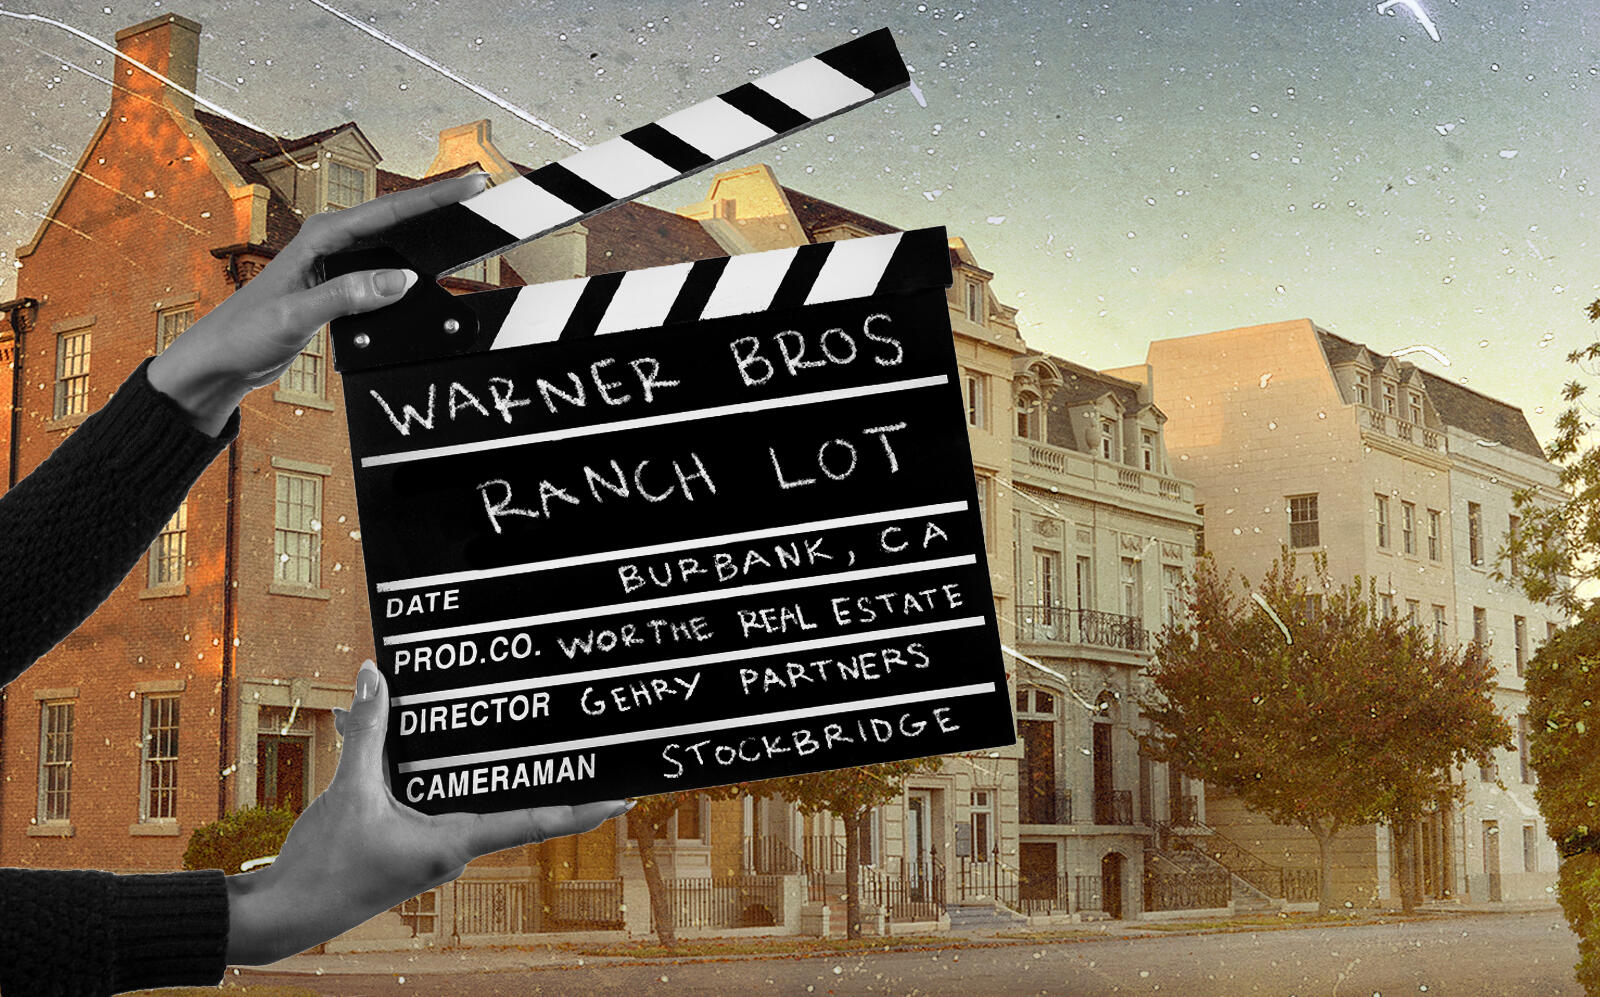 One of the exterior shots at the current Ranch Lot (Warner Brothers, Getty)